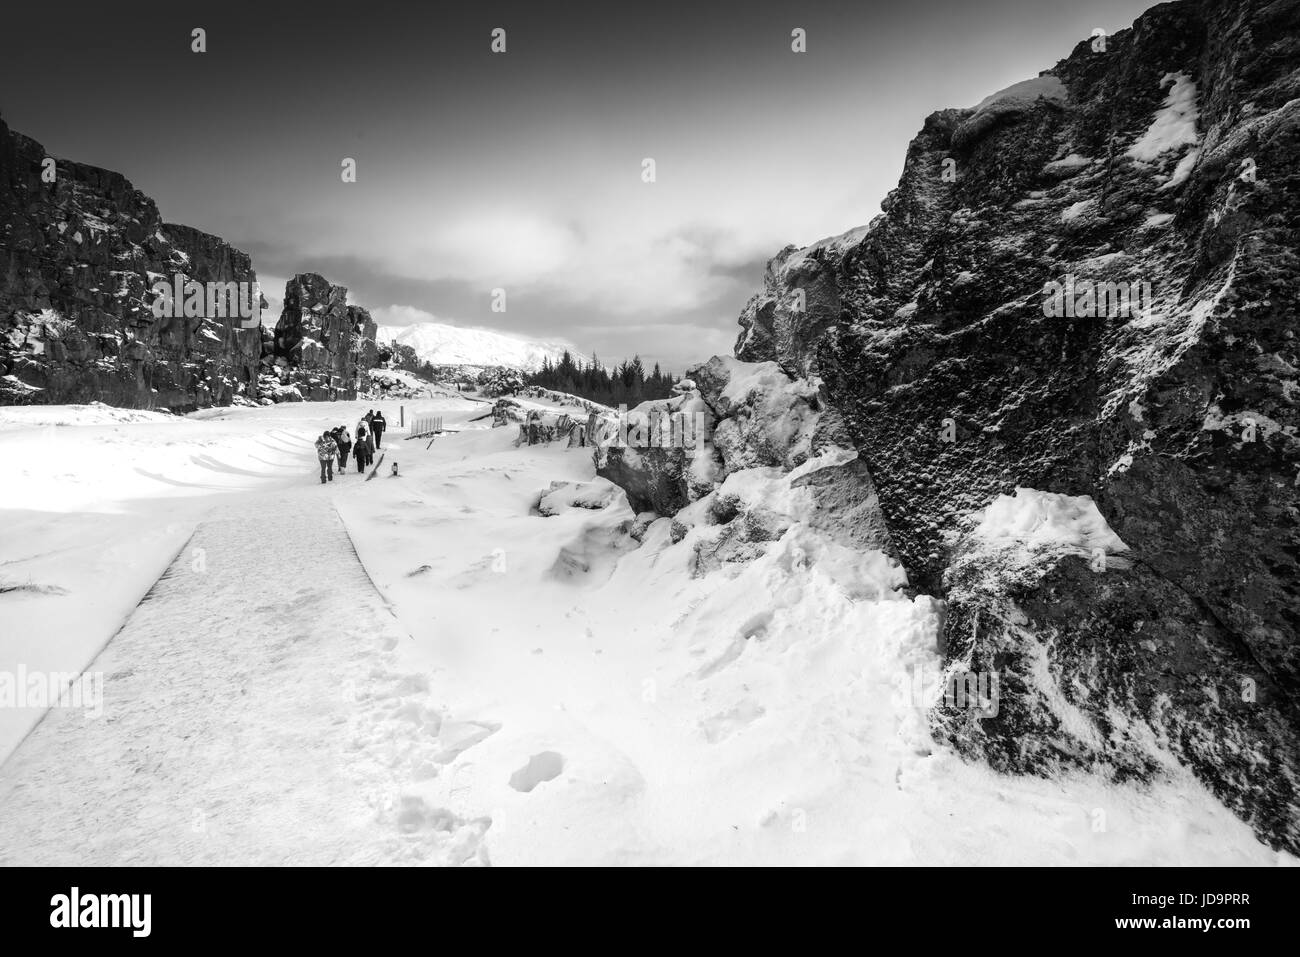 Small group of people walking on snow covered pathway by rock formations, Iceland, Europe, black and white. Iceland nature 2017 winter cold Stock Photo